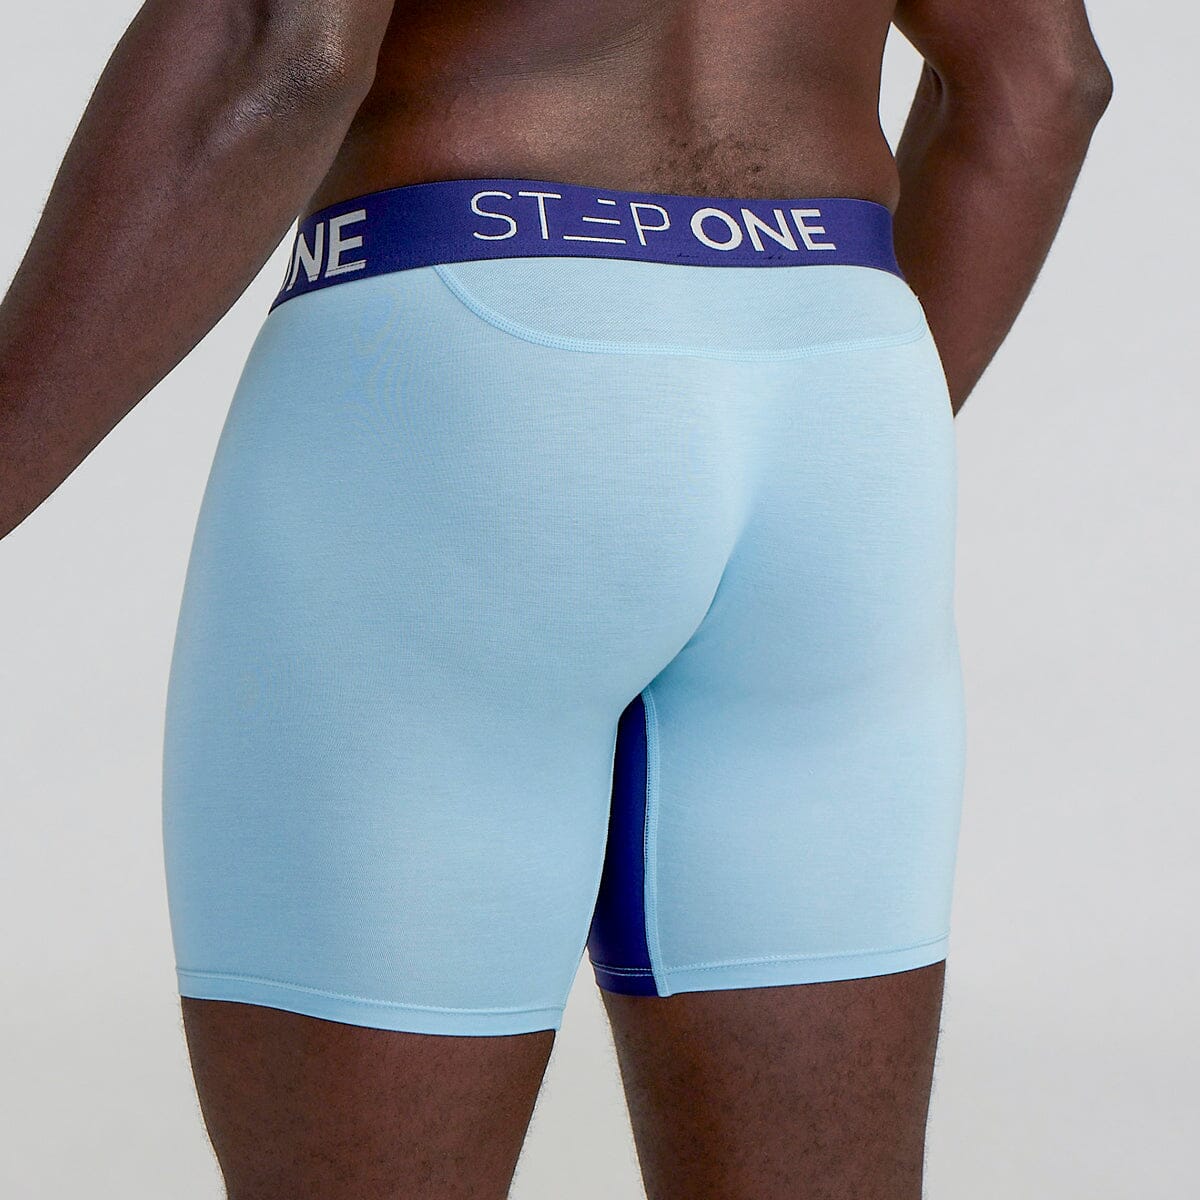 Boxer Brief Fly - Megalodong - Bamboo Underwear